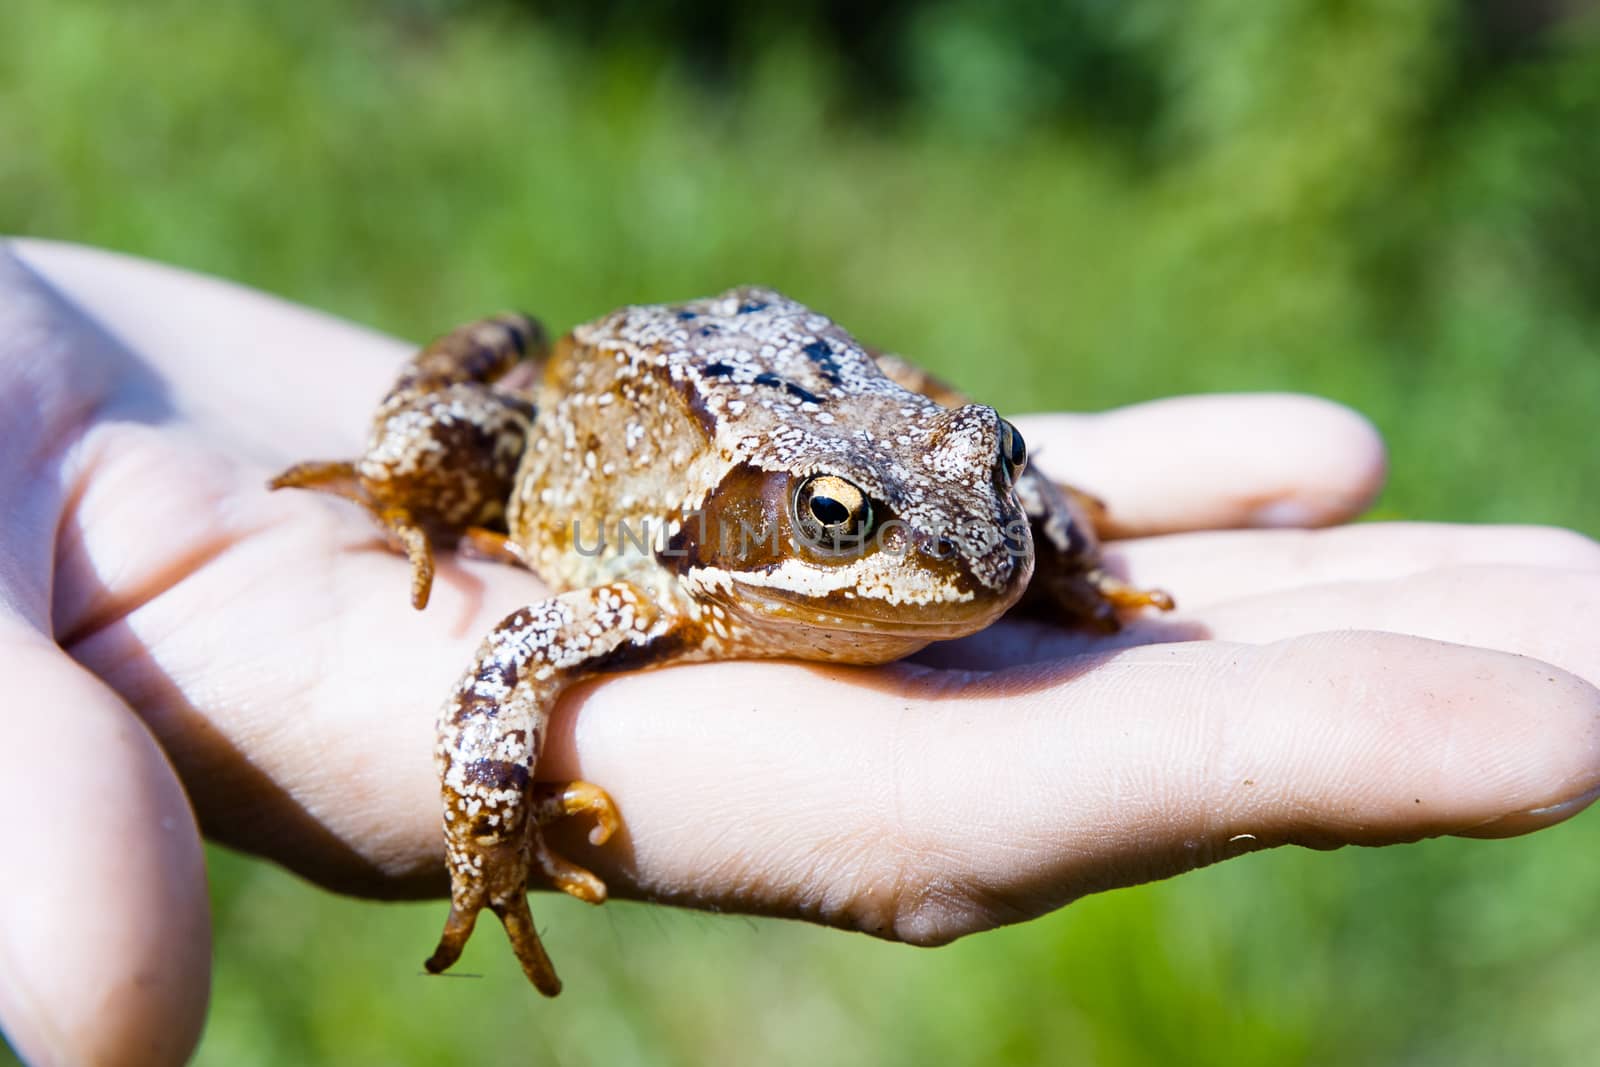 Brown frog on a man's palm. reptile